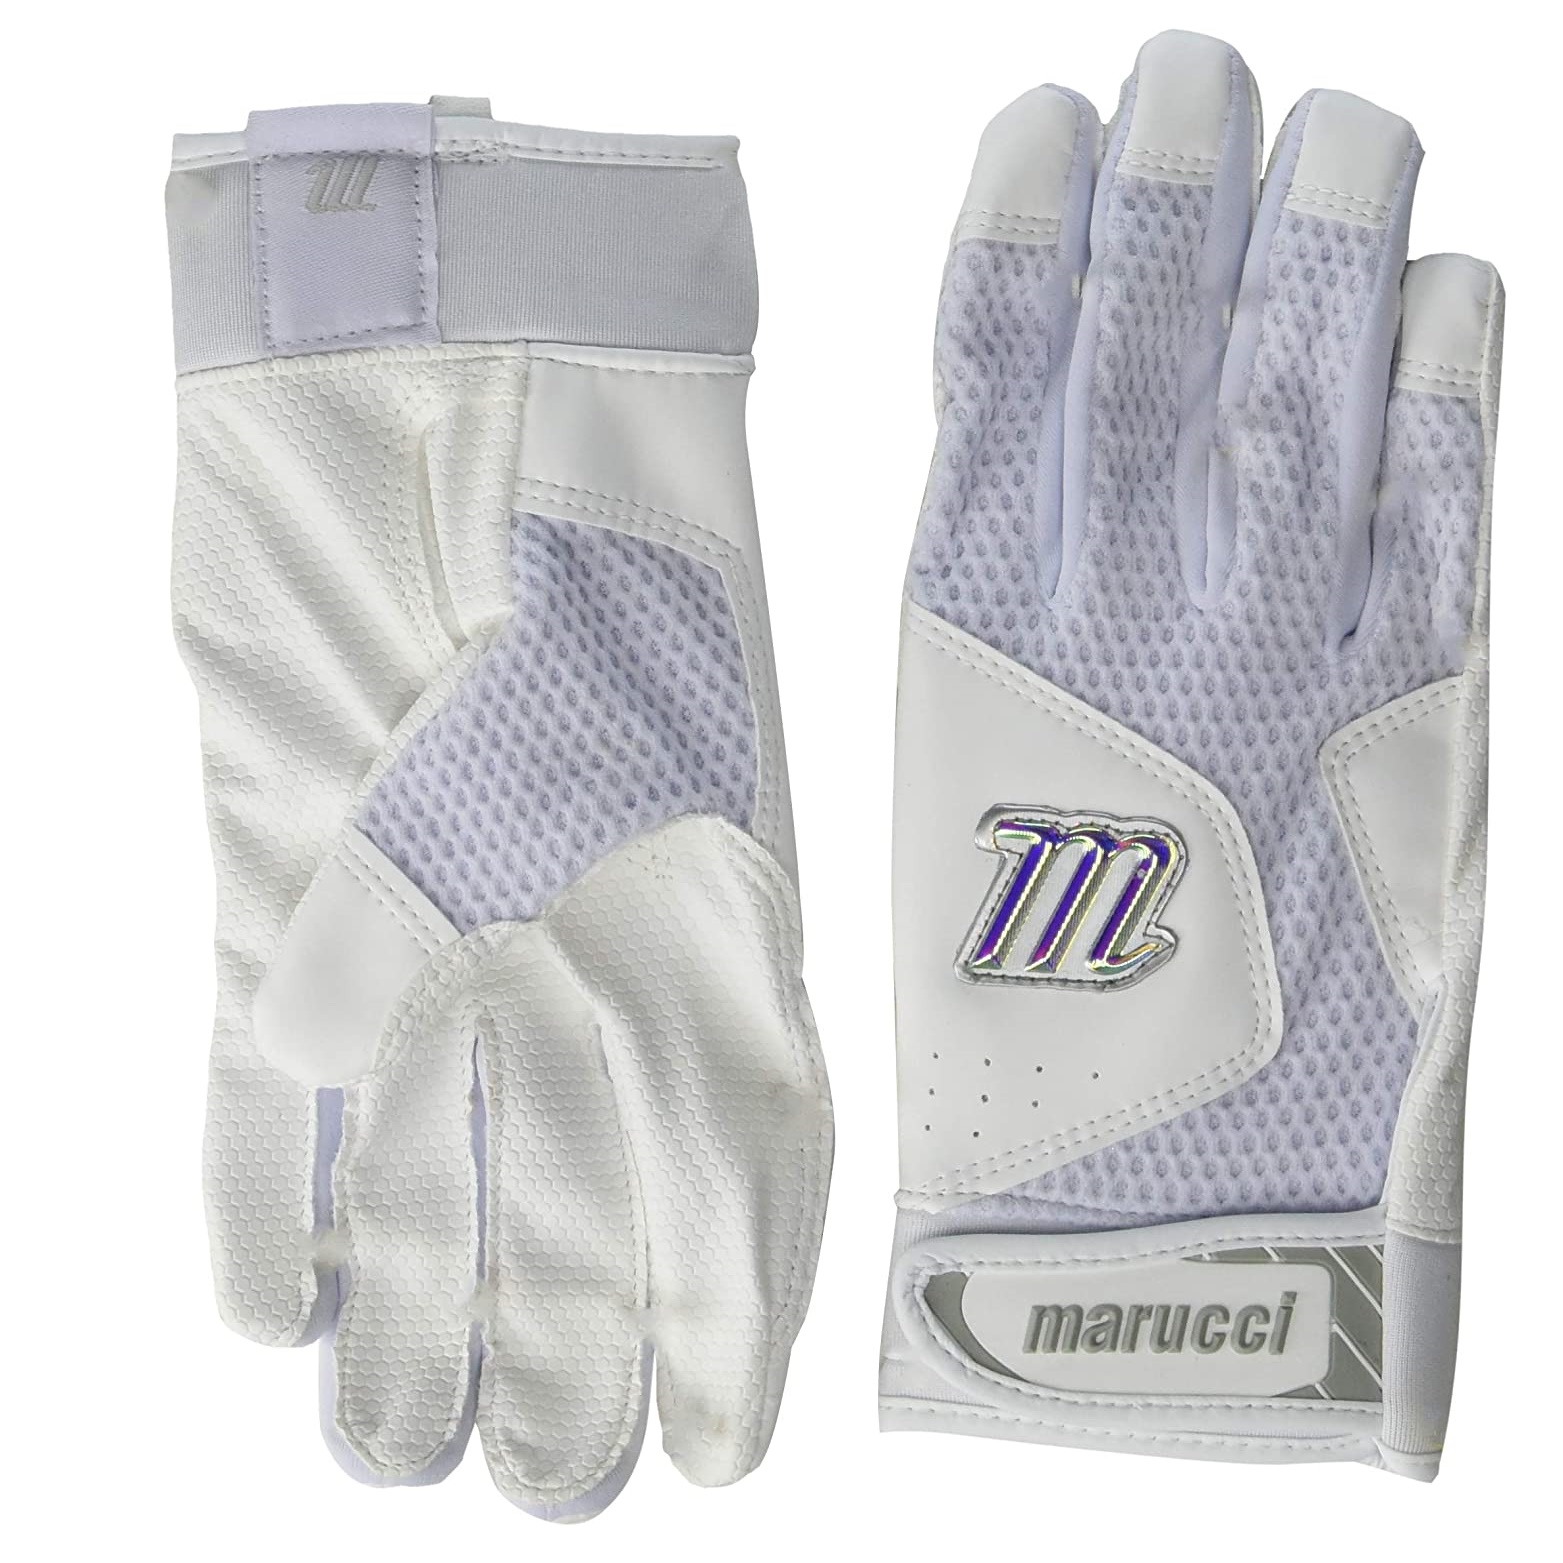 An evolution of Marucci’s earlier batting glove line, this year’s Quest features an innovative dimpled mesh back that is breathable, yet durable along with a grip-enhancing palm for more confidence. Additionally, a neoprene cuff delivers unmatched wrist support and comfort to promote a clean, unhindered swing. - Durable genuine leather palm - Dimpled mesh back - Neoprene cuff